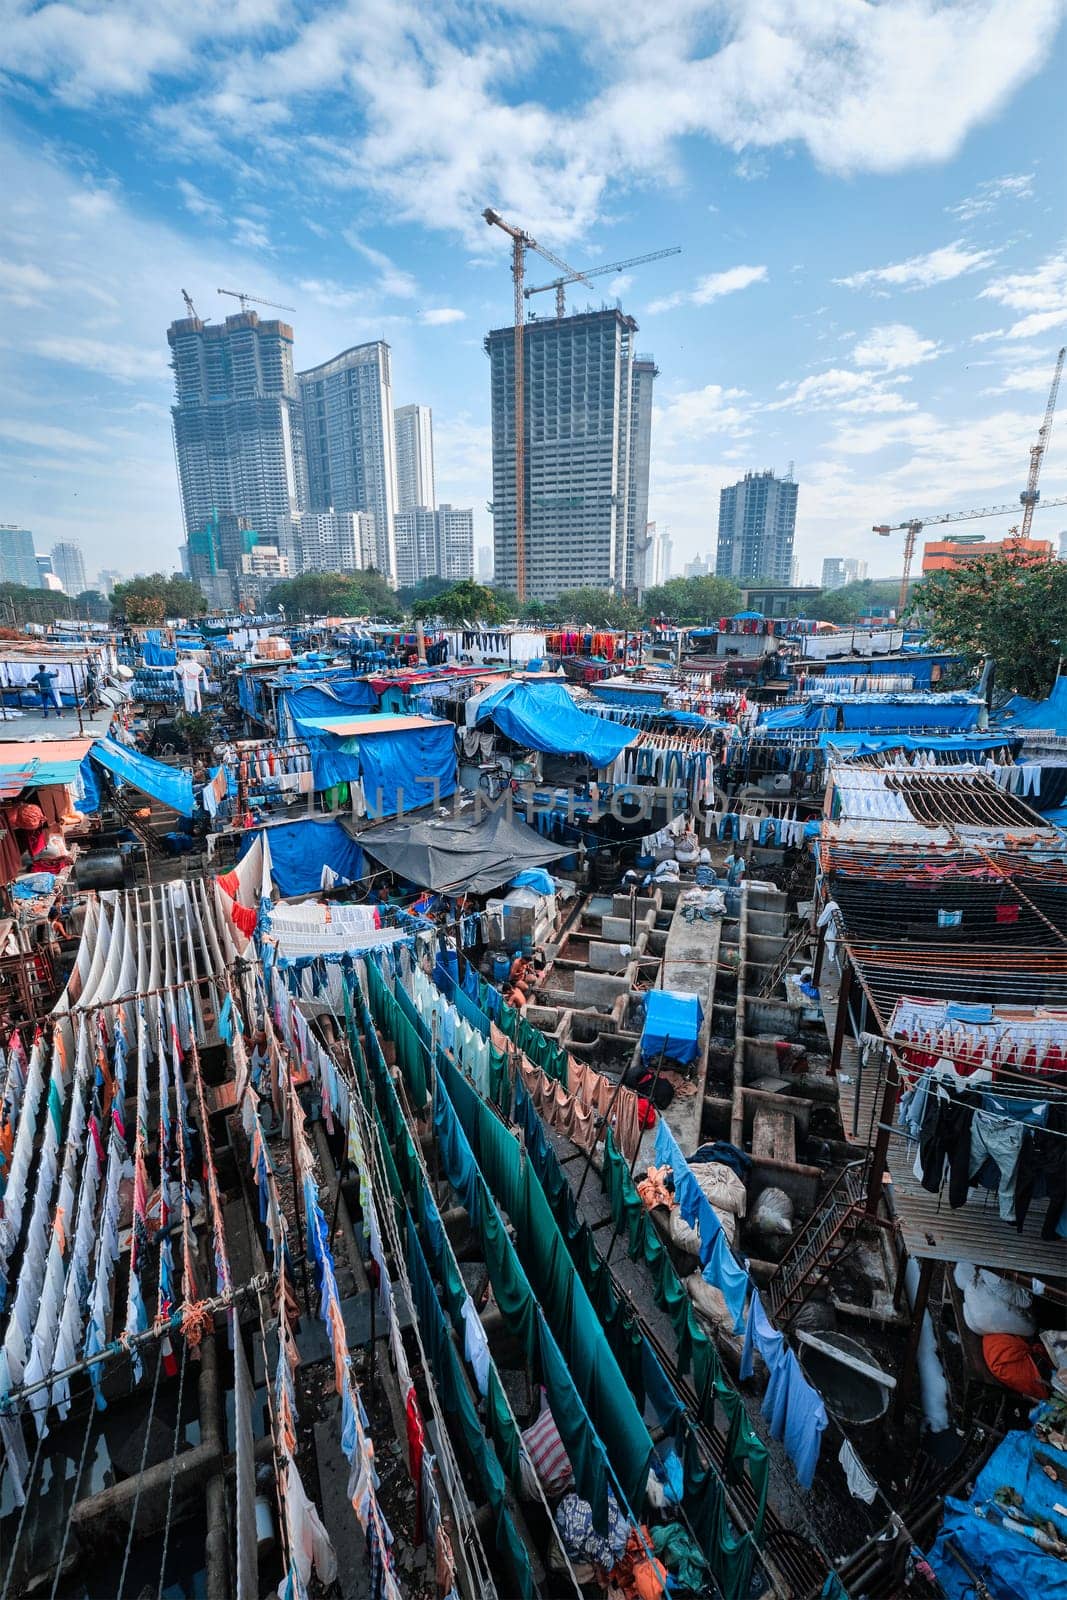 Dhobi Ghat Mahalaxmi Dhobi Ghat is an open air laundromat lavoir in Mumbai, India with laundry drying on ropes by dimol